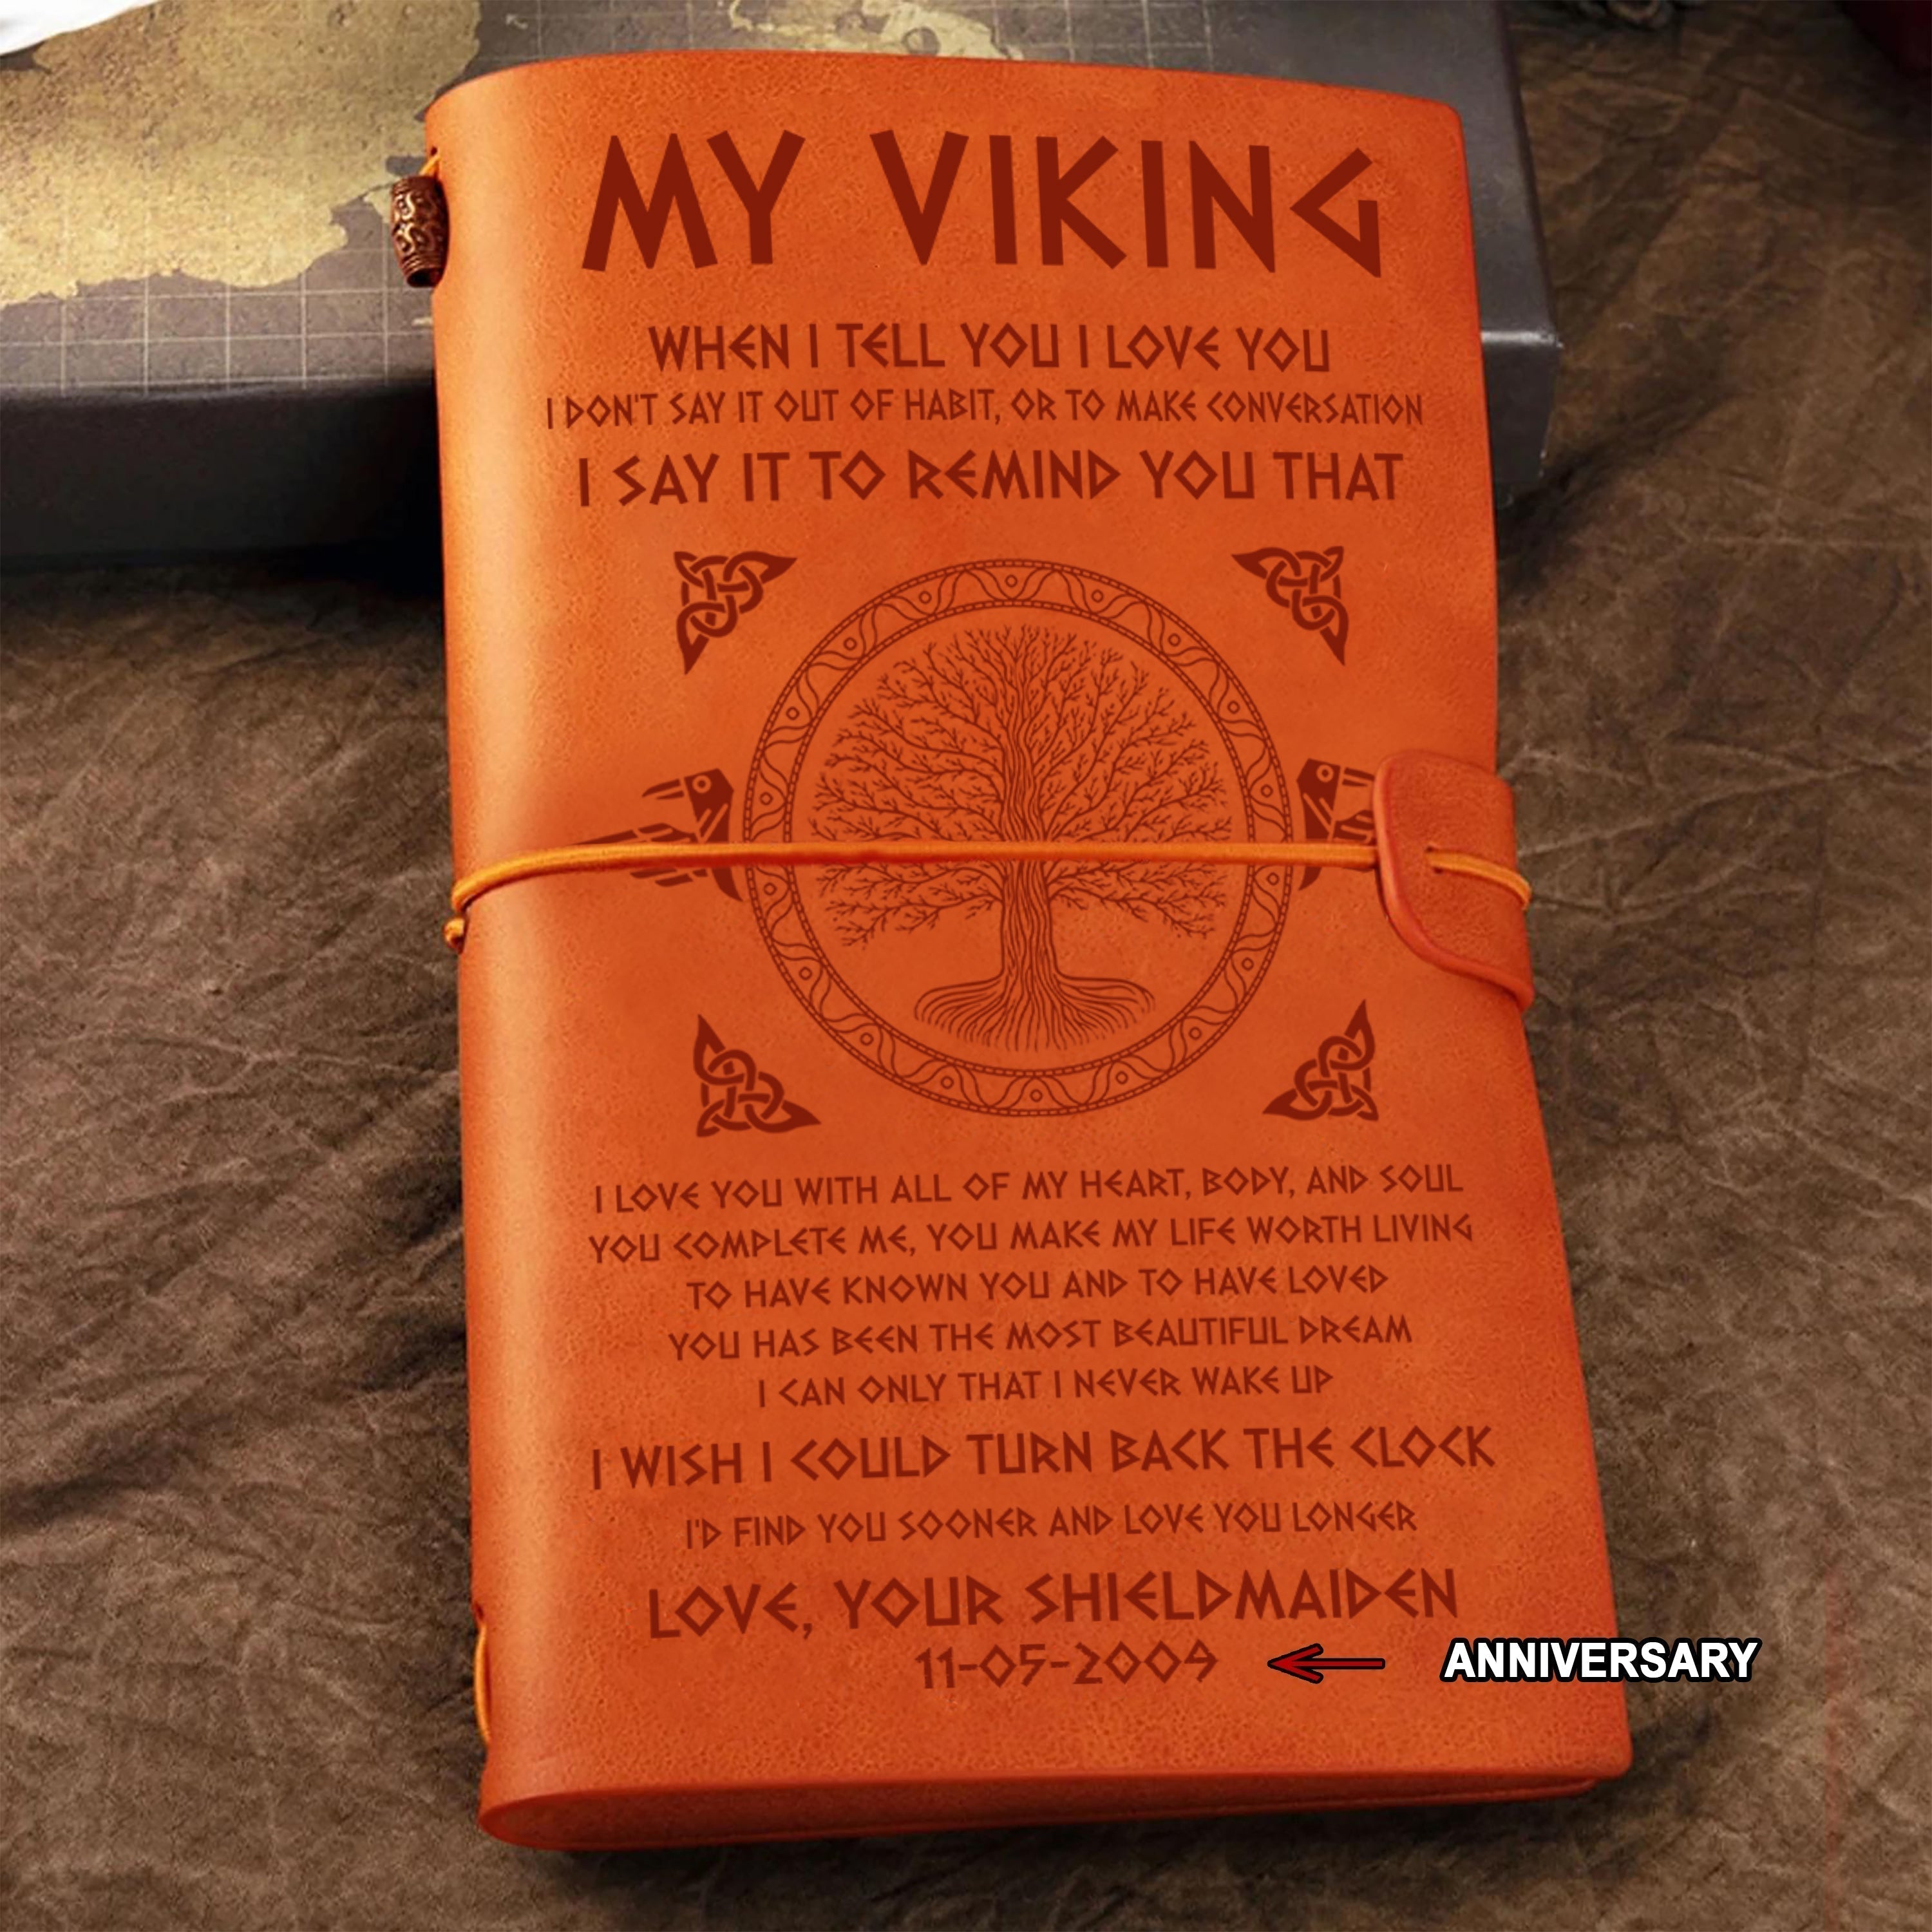 Viking vintage journal notebook wife to husband when i tell you o love you I wish i could turn back the clock father's day gifts for husband